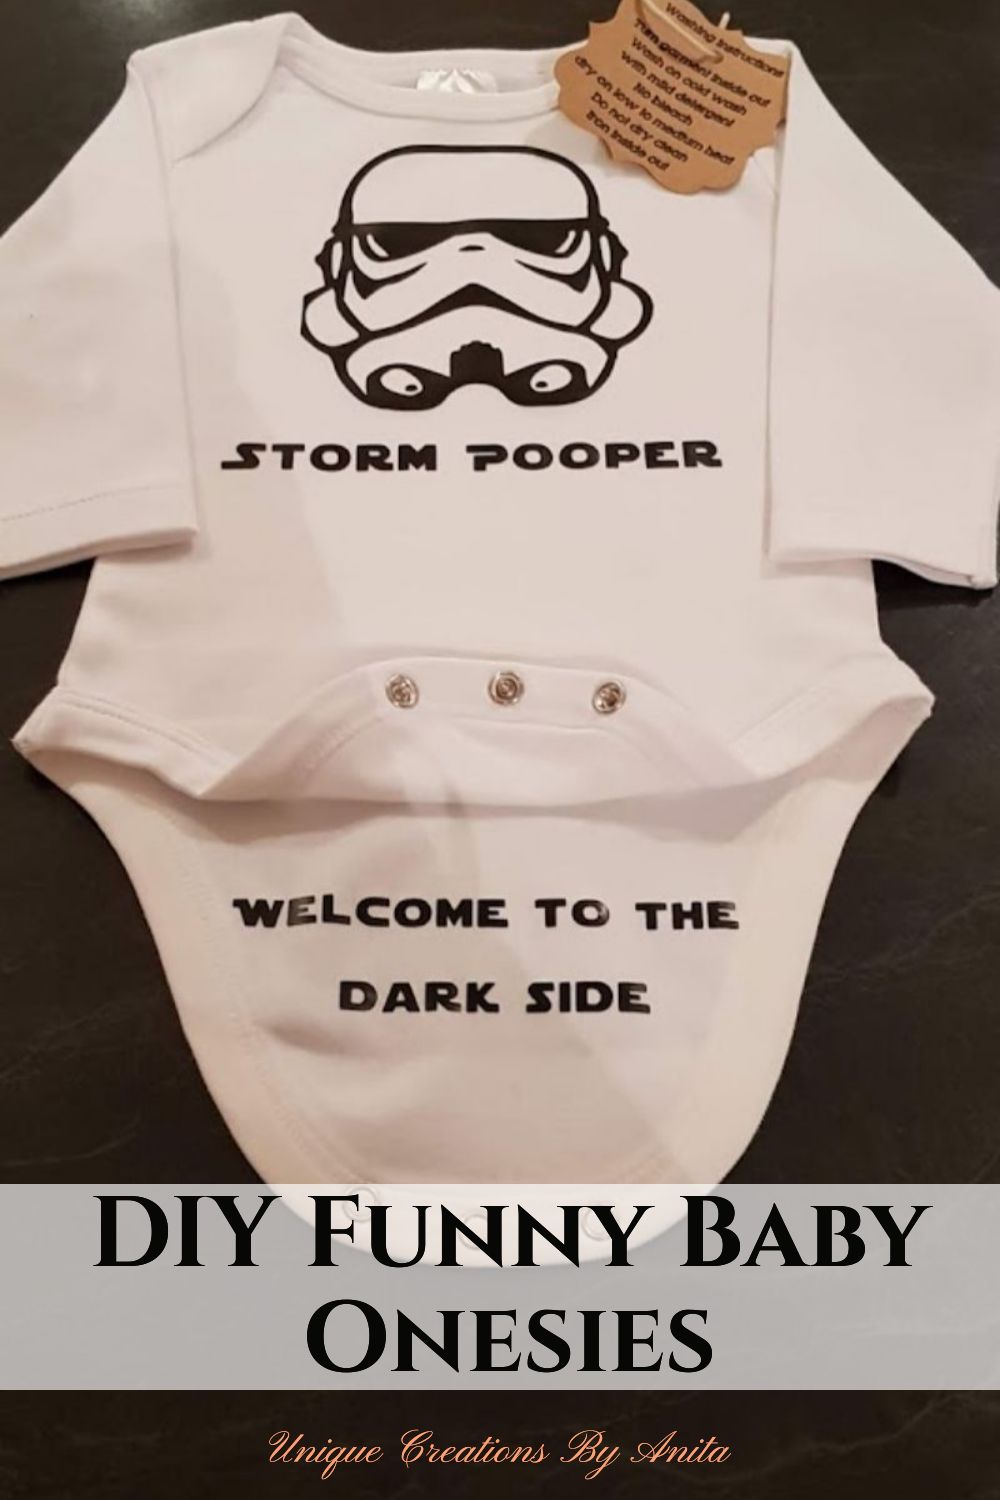 Custom text added to a baby onesie